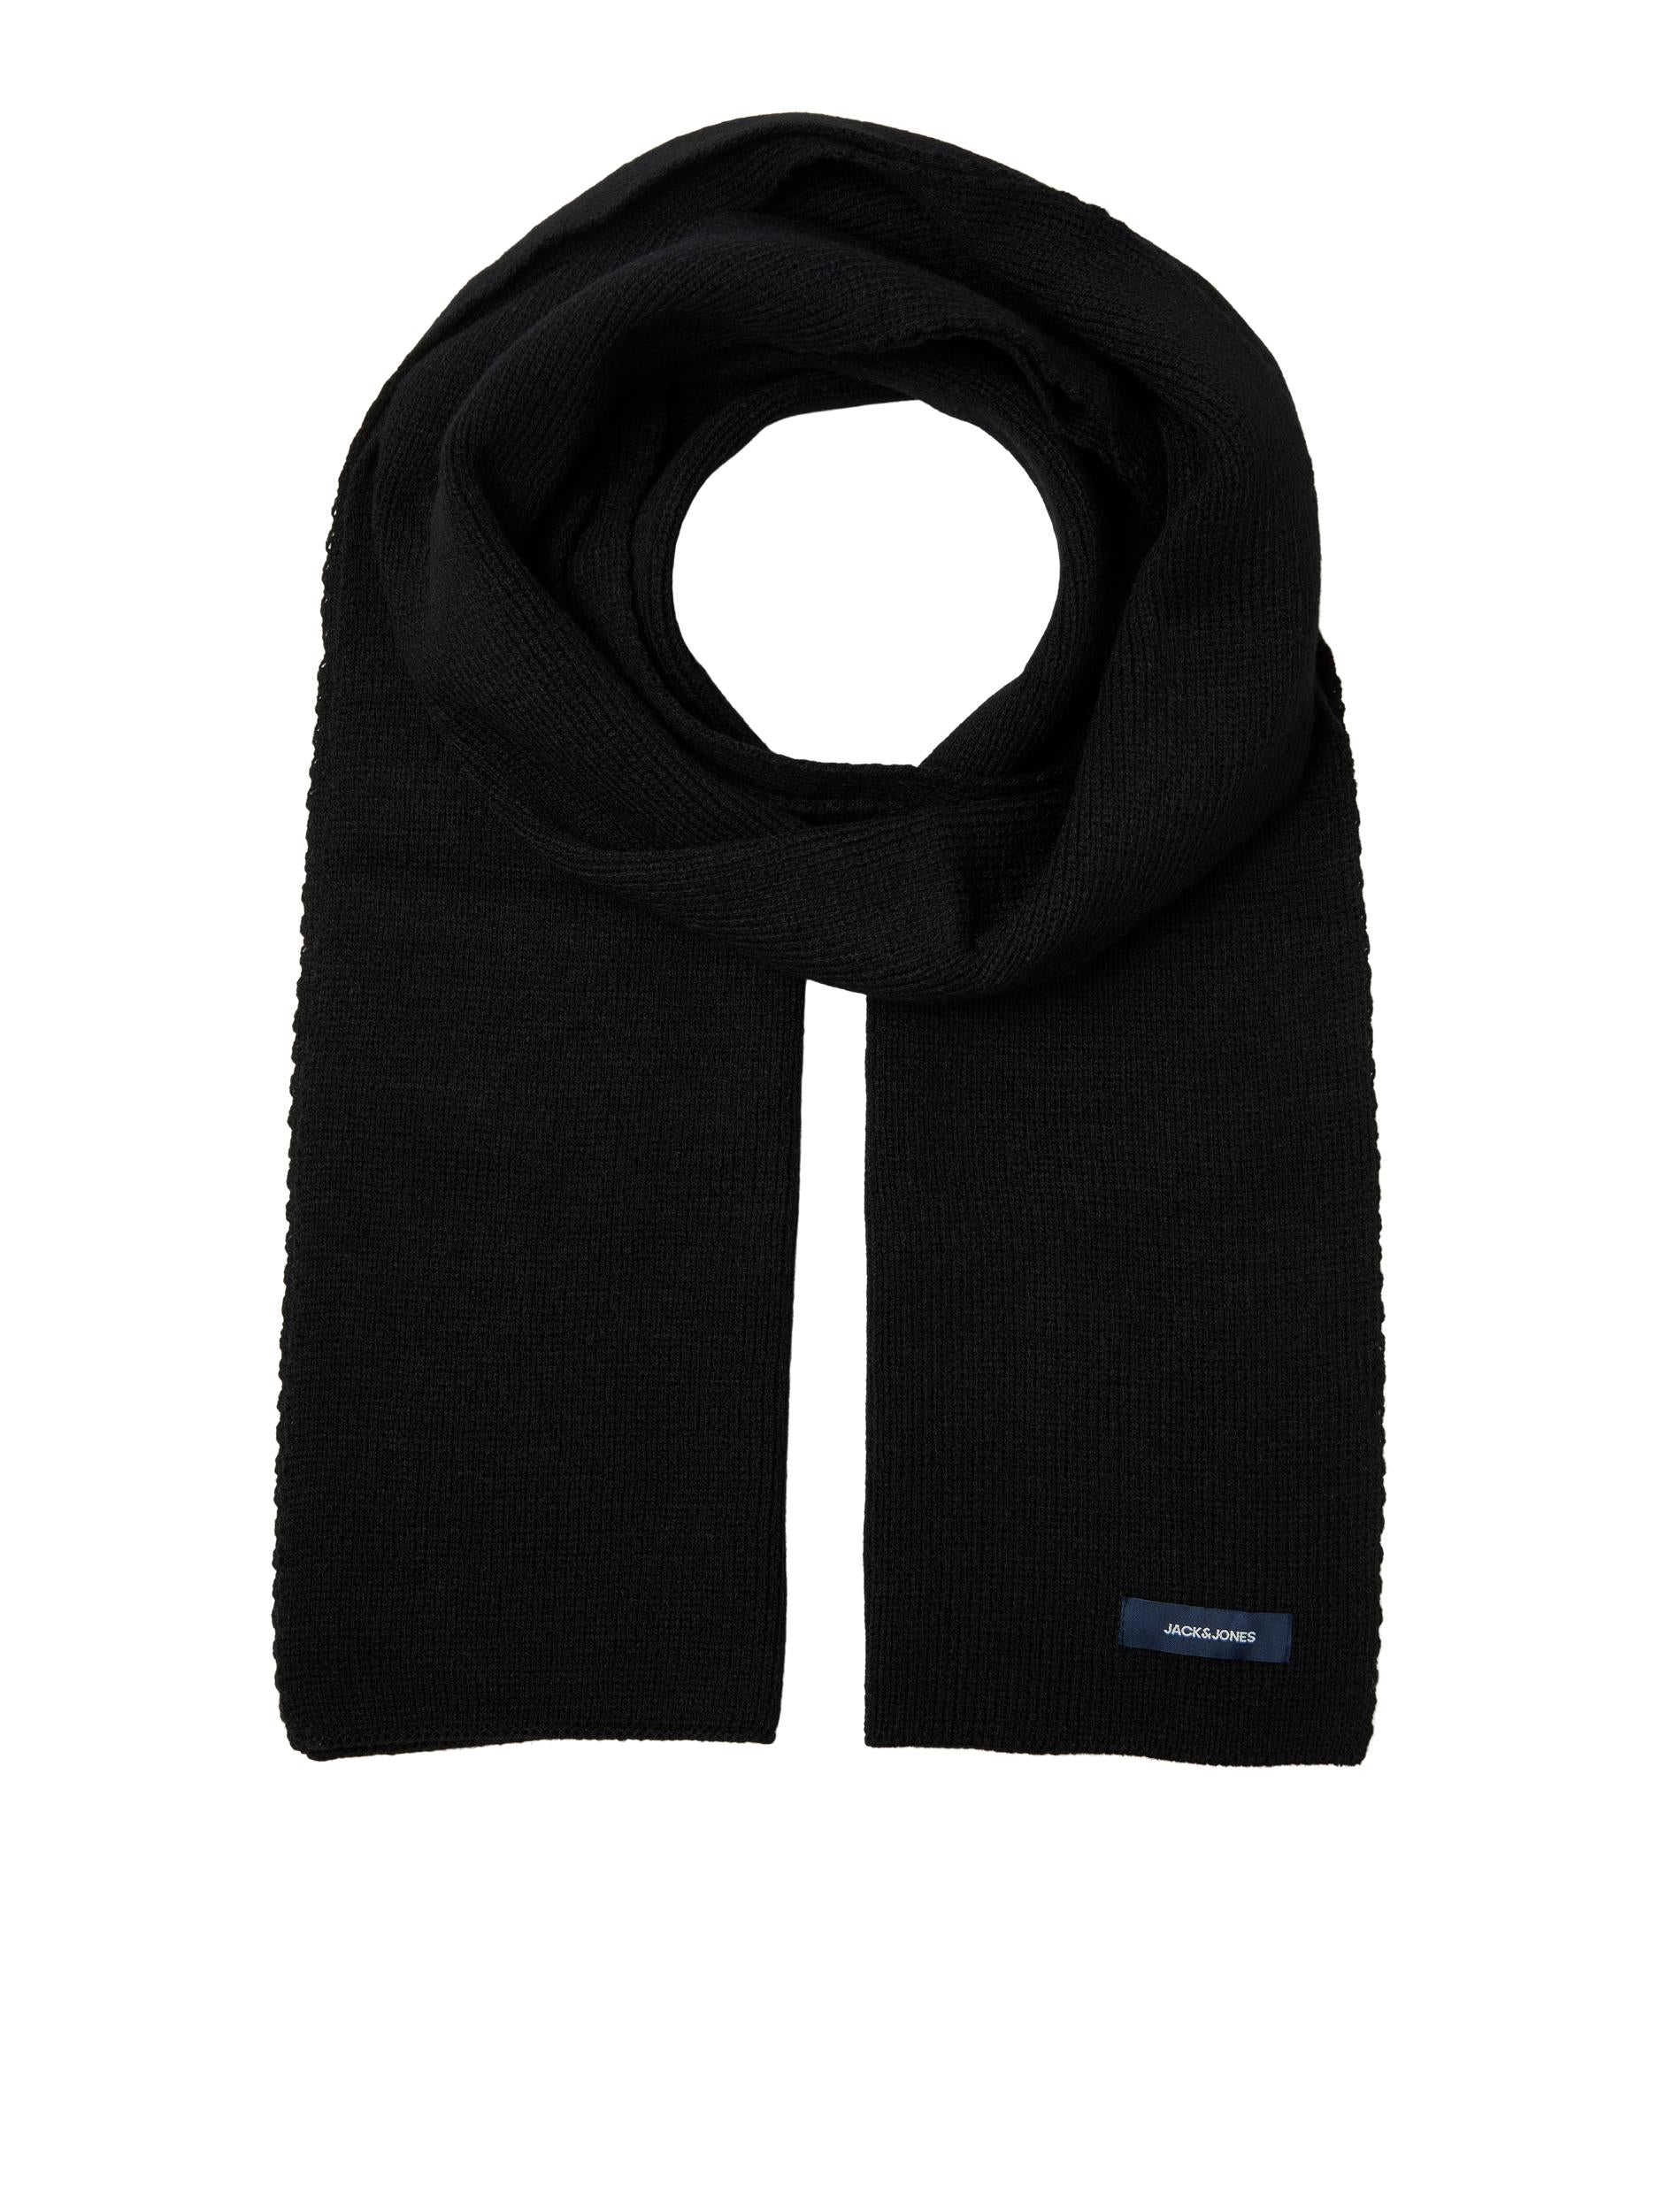 DNA Knitted Men's Black Scarf-Flat view